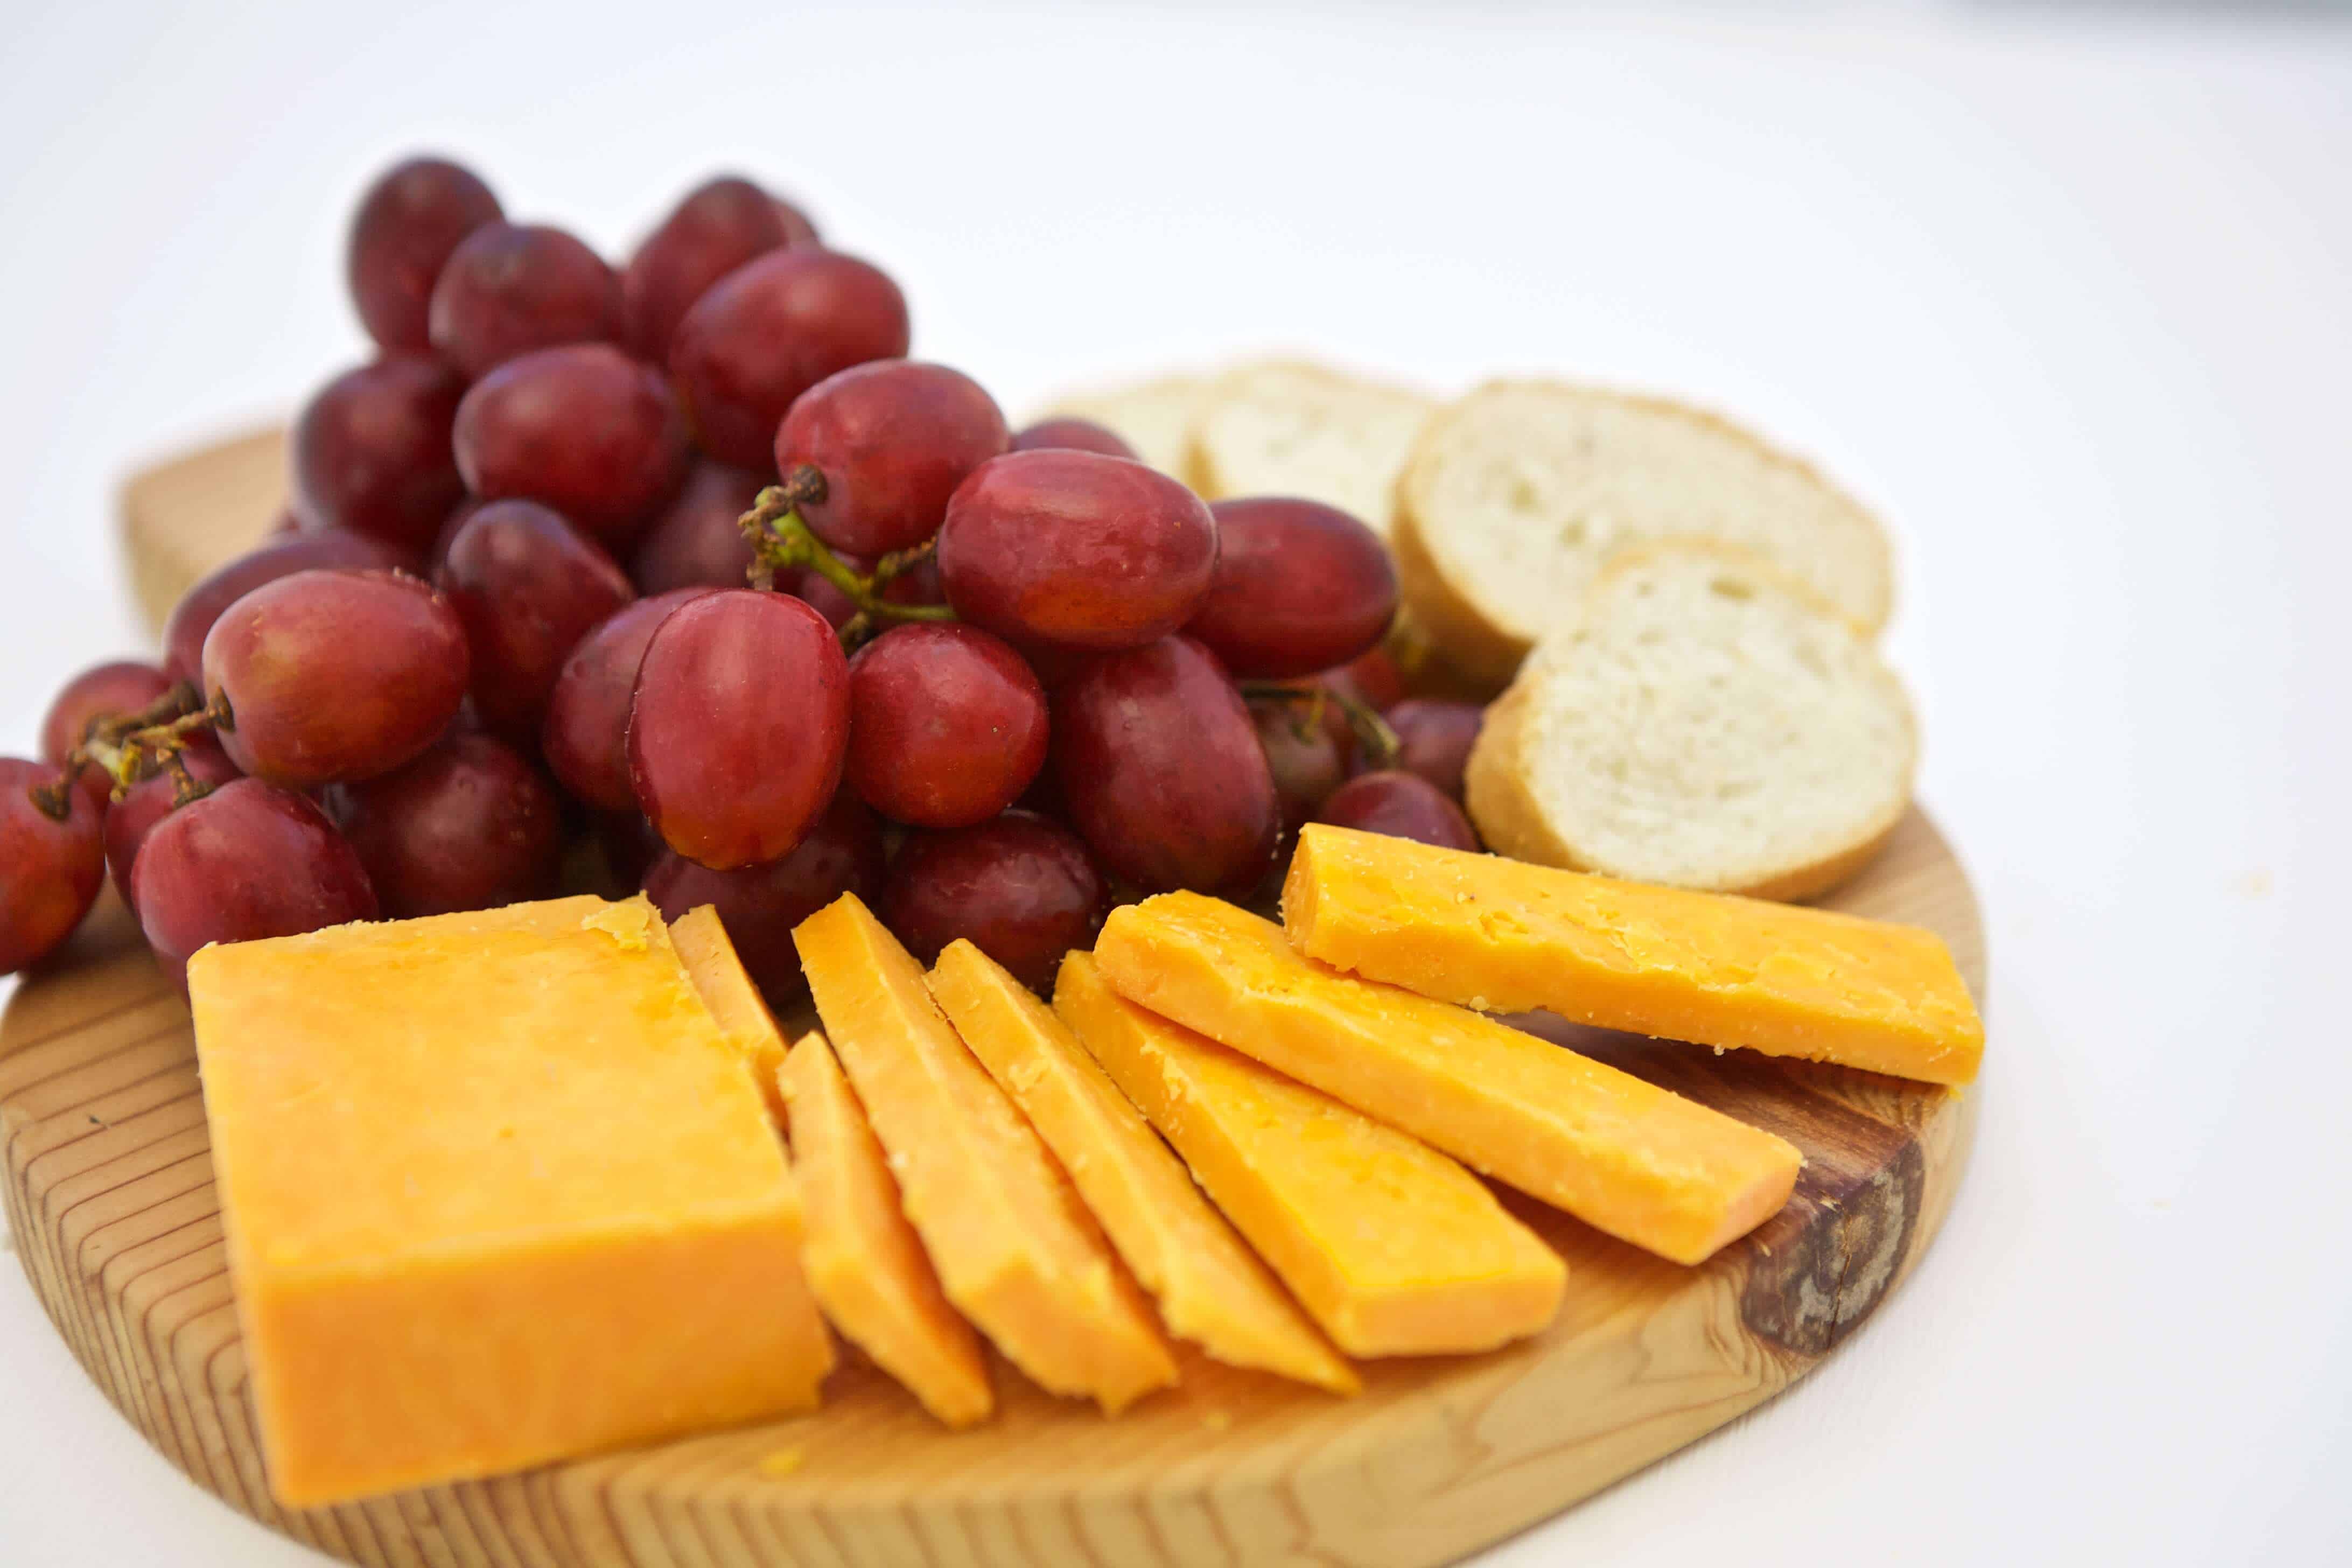 Grapes and cheese are the perfect appetizer for any occasion, no matter the time of year. Here are some cheese platter ideas to meet any need or level of sophistication.